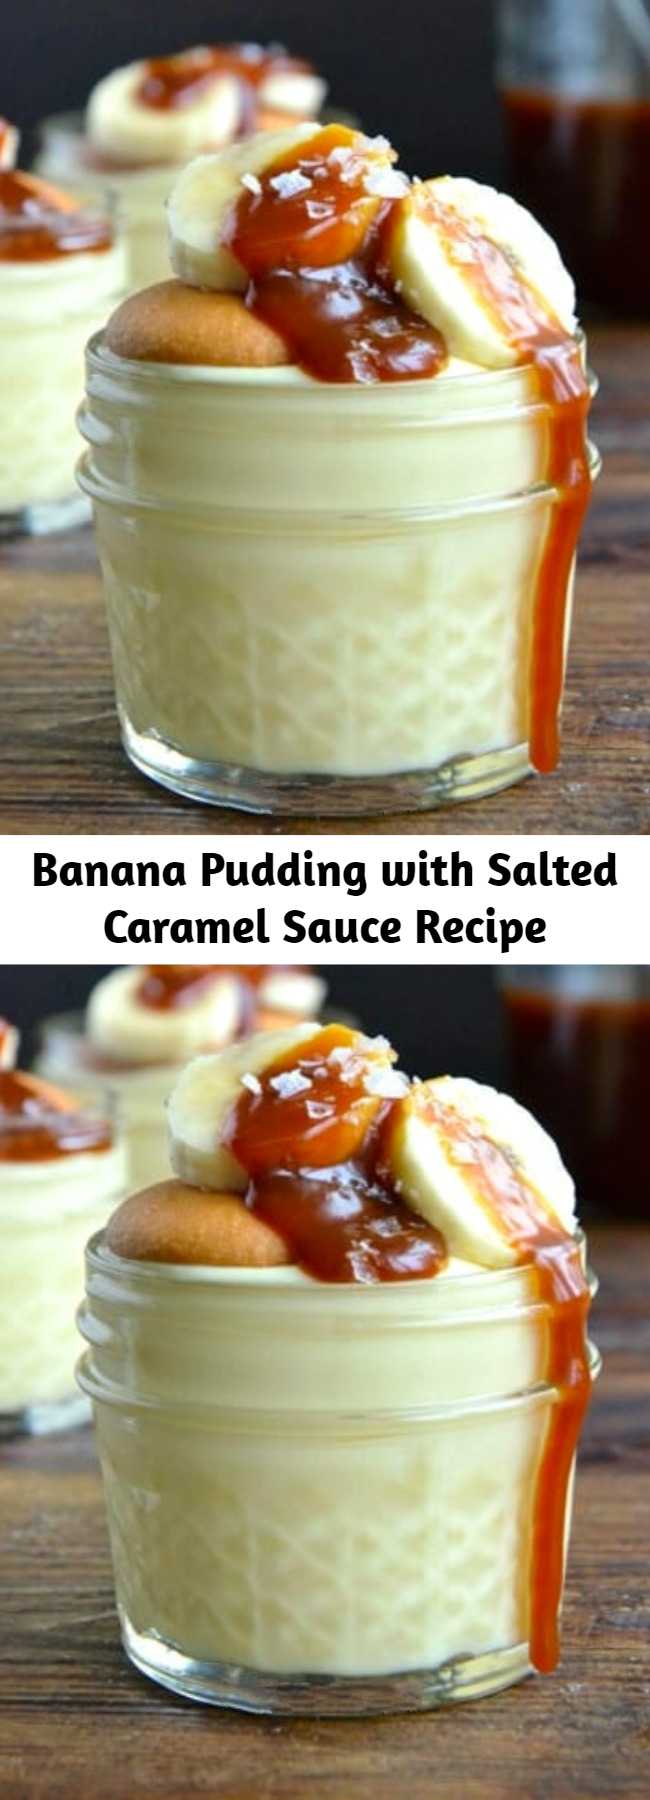 The creamy pudding is layered with sliced bananas, crunchy Nilla Wafers and homemade salted caramel sauce, which adds the perfect savory twist to this southern-inspired sweet.